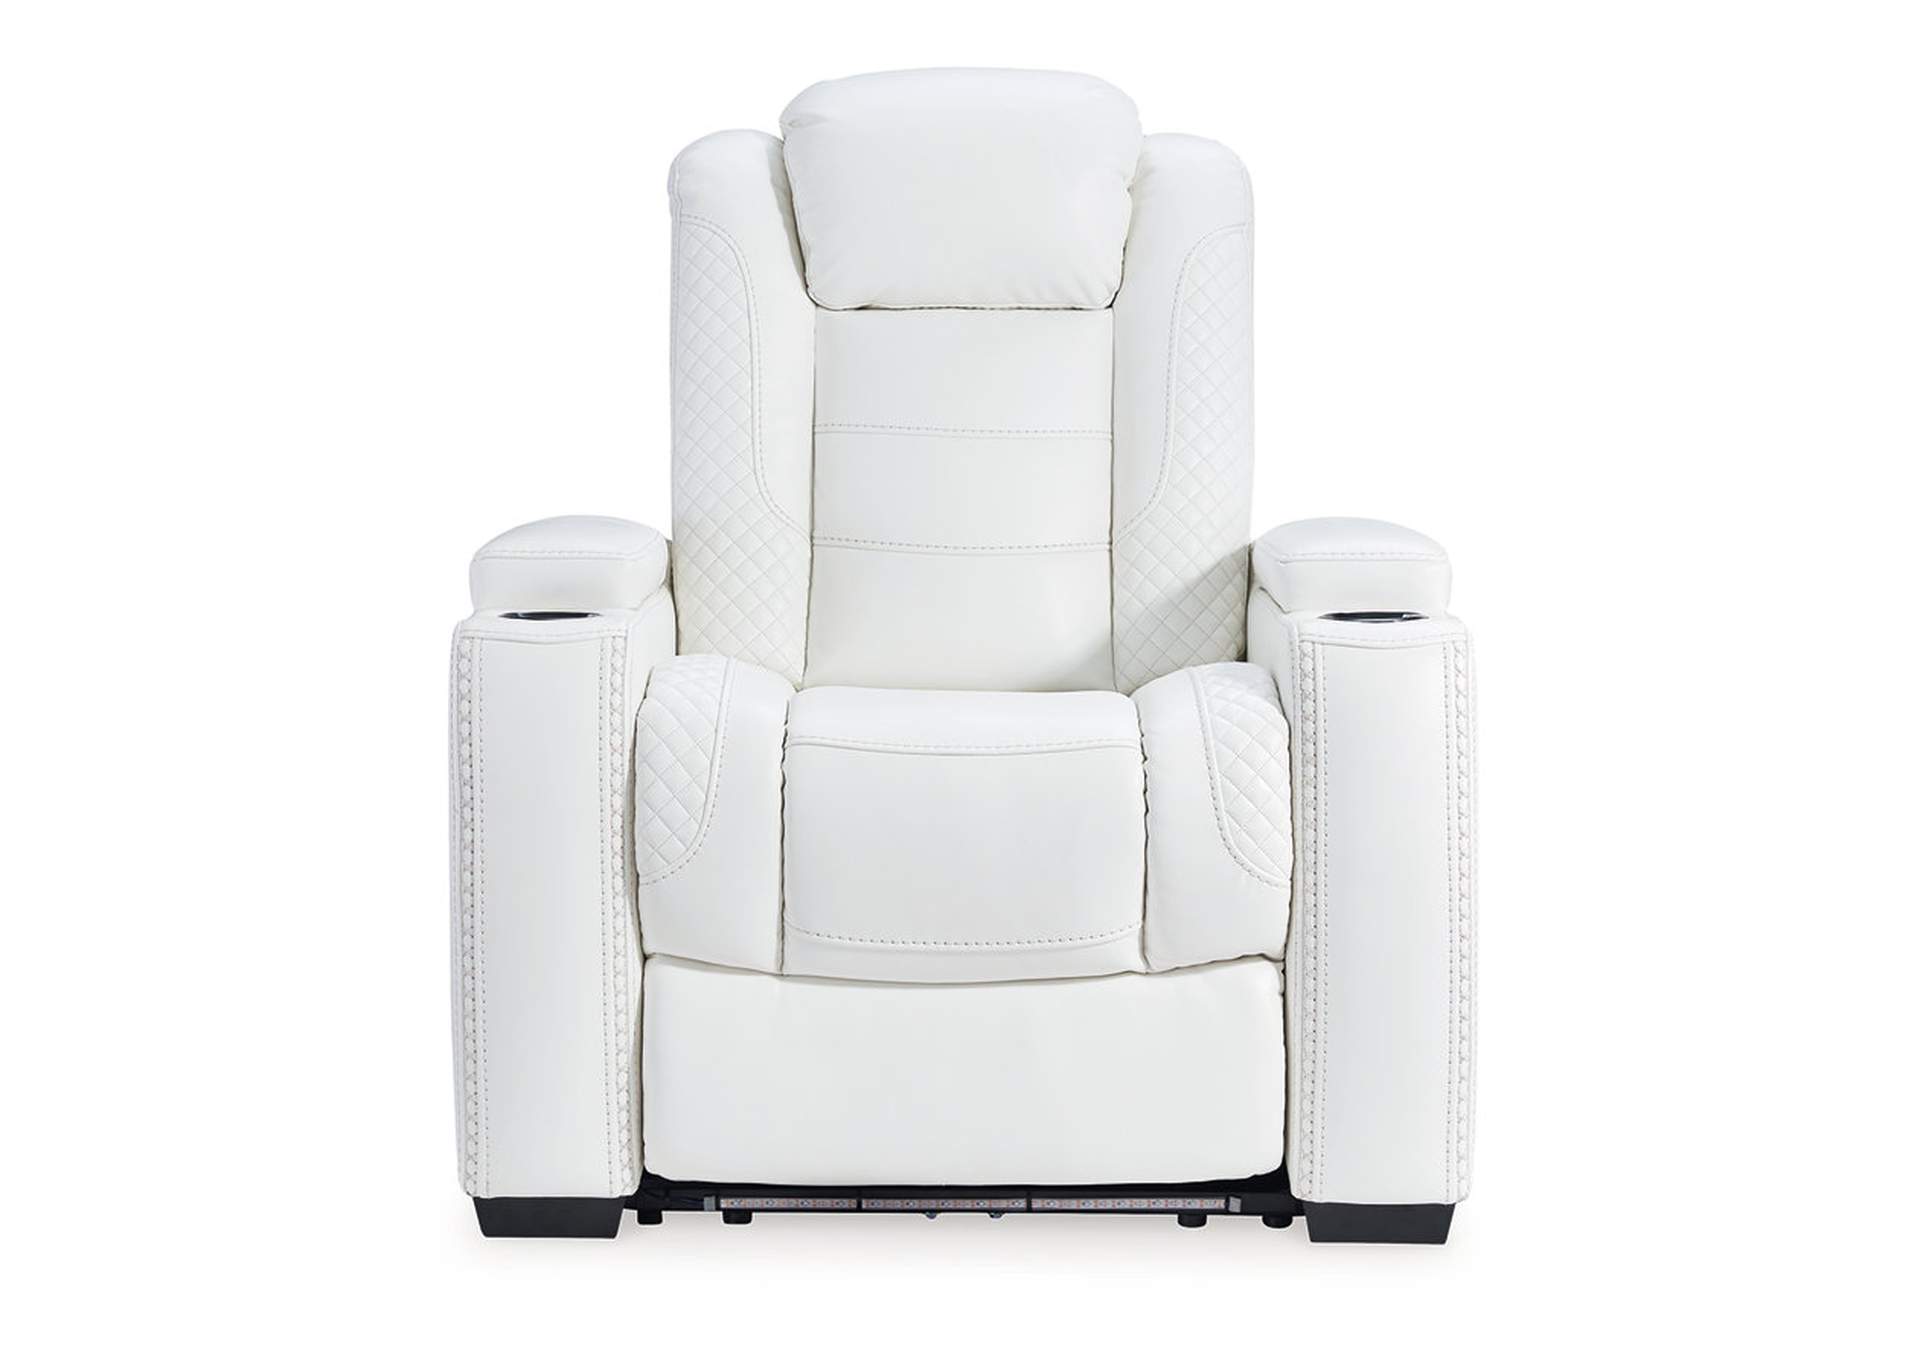 Party Time Power Recliner,Signature Design By Ashley